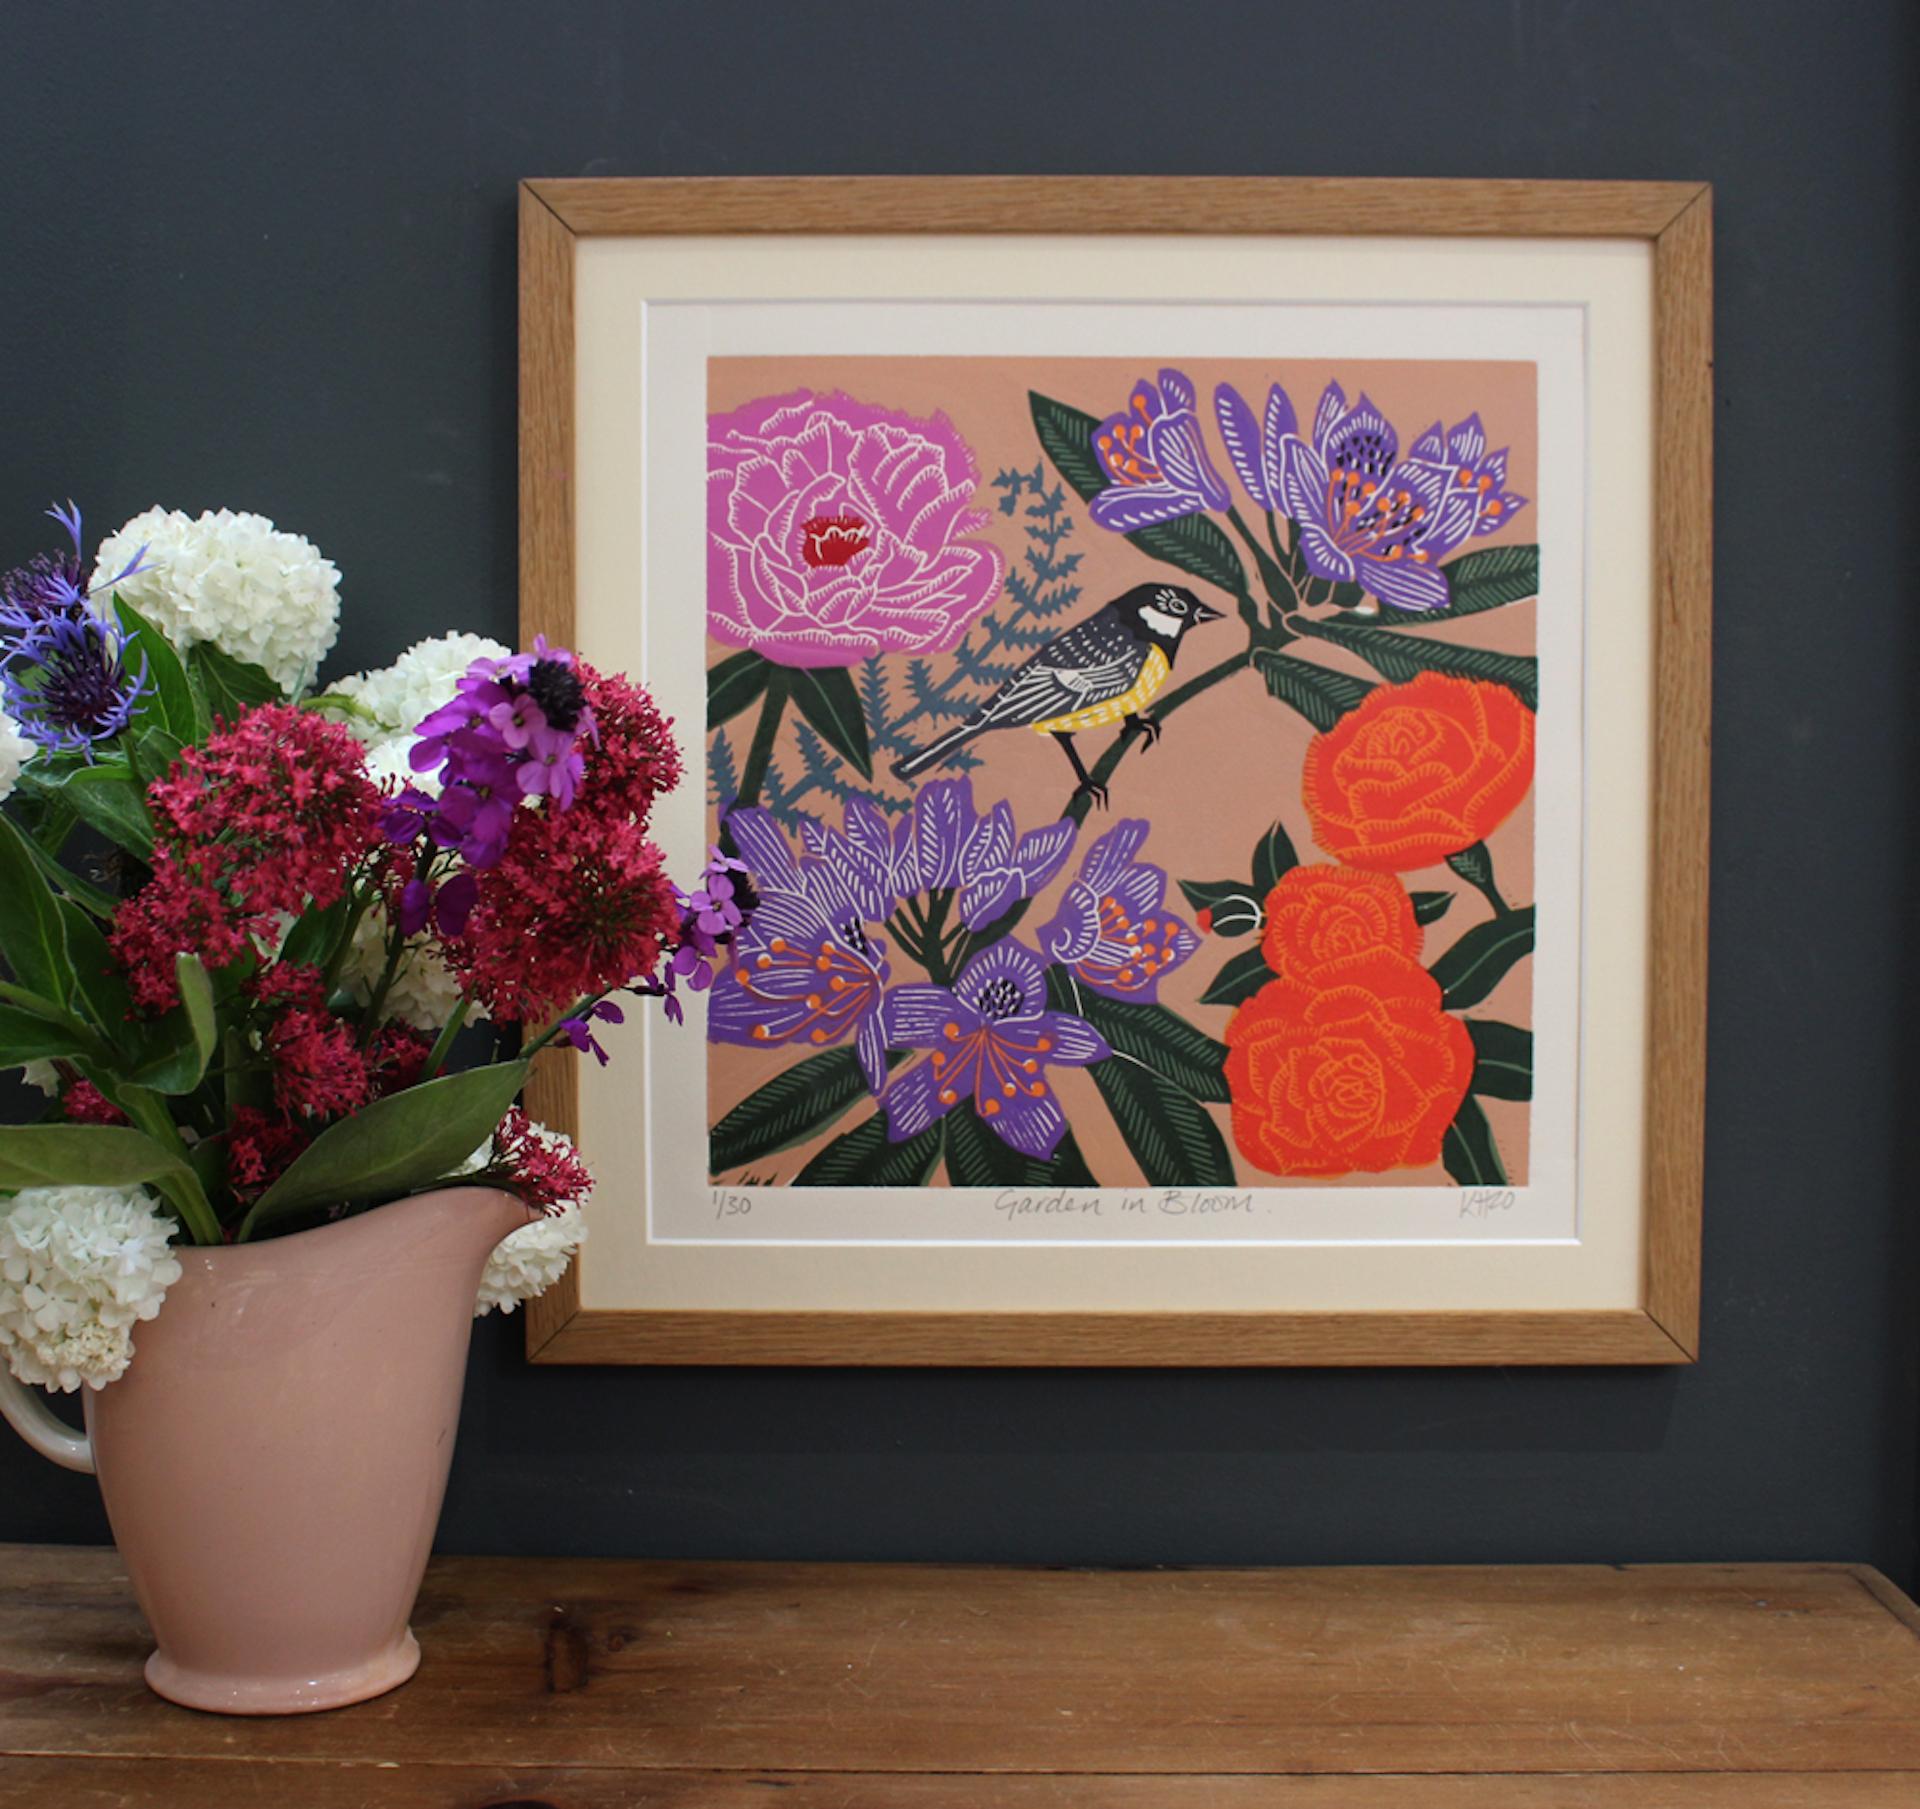 Garden in Bloom by Kate Heiss, Floral Art, Landscape Print, Contemporary Art 1